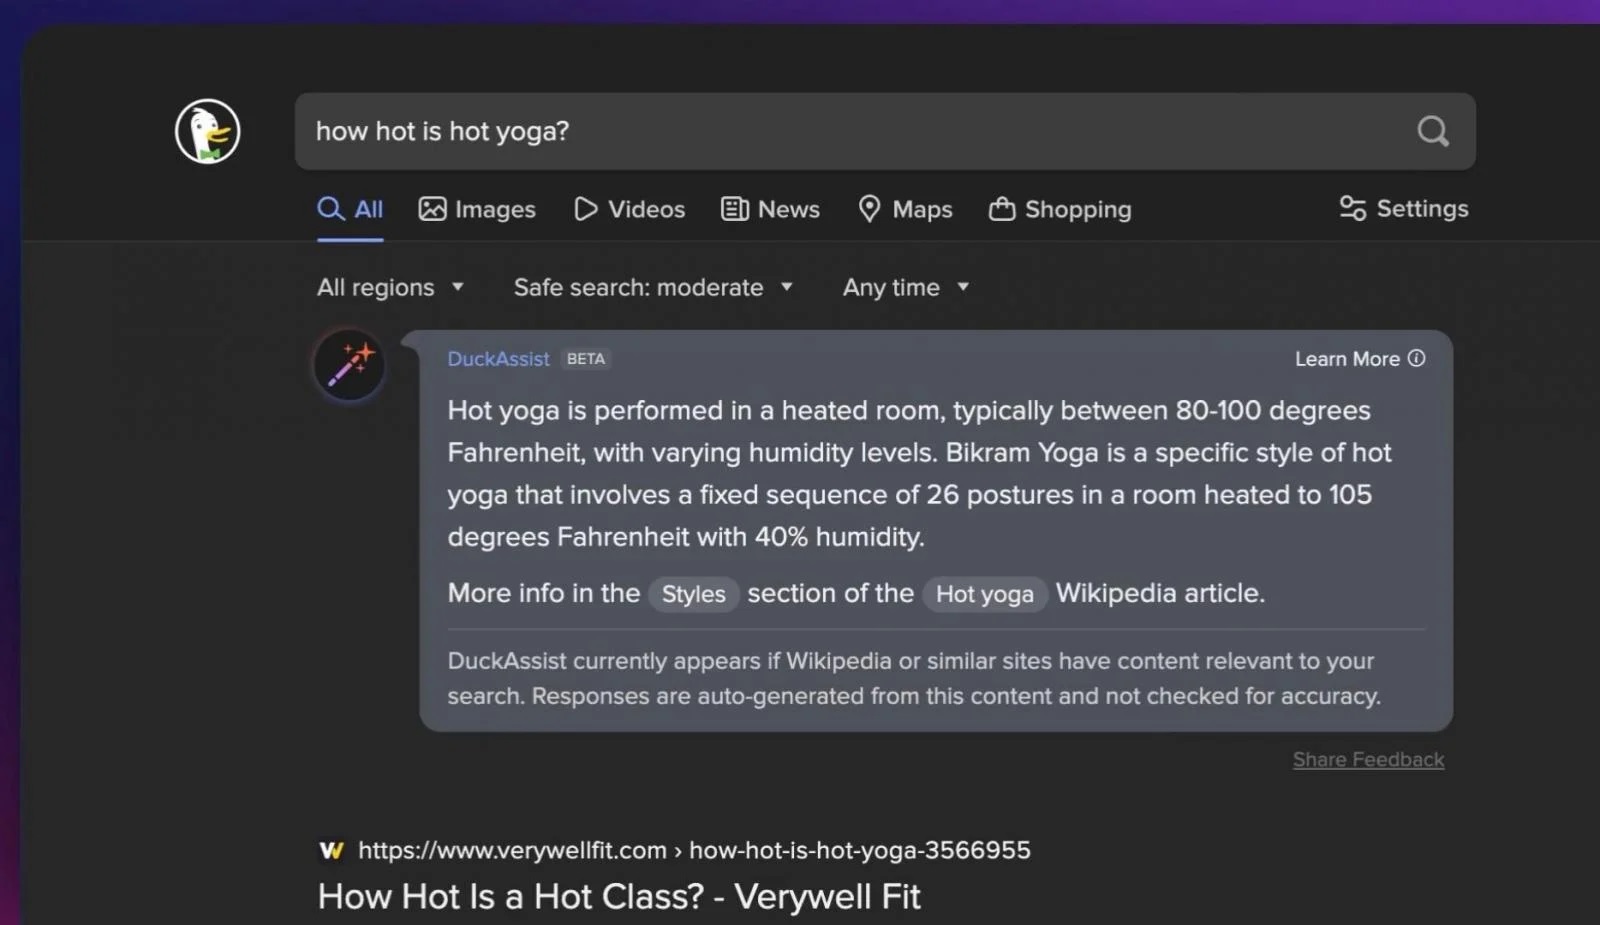 DuckDuckGo includes AI-powered search responses